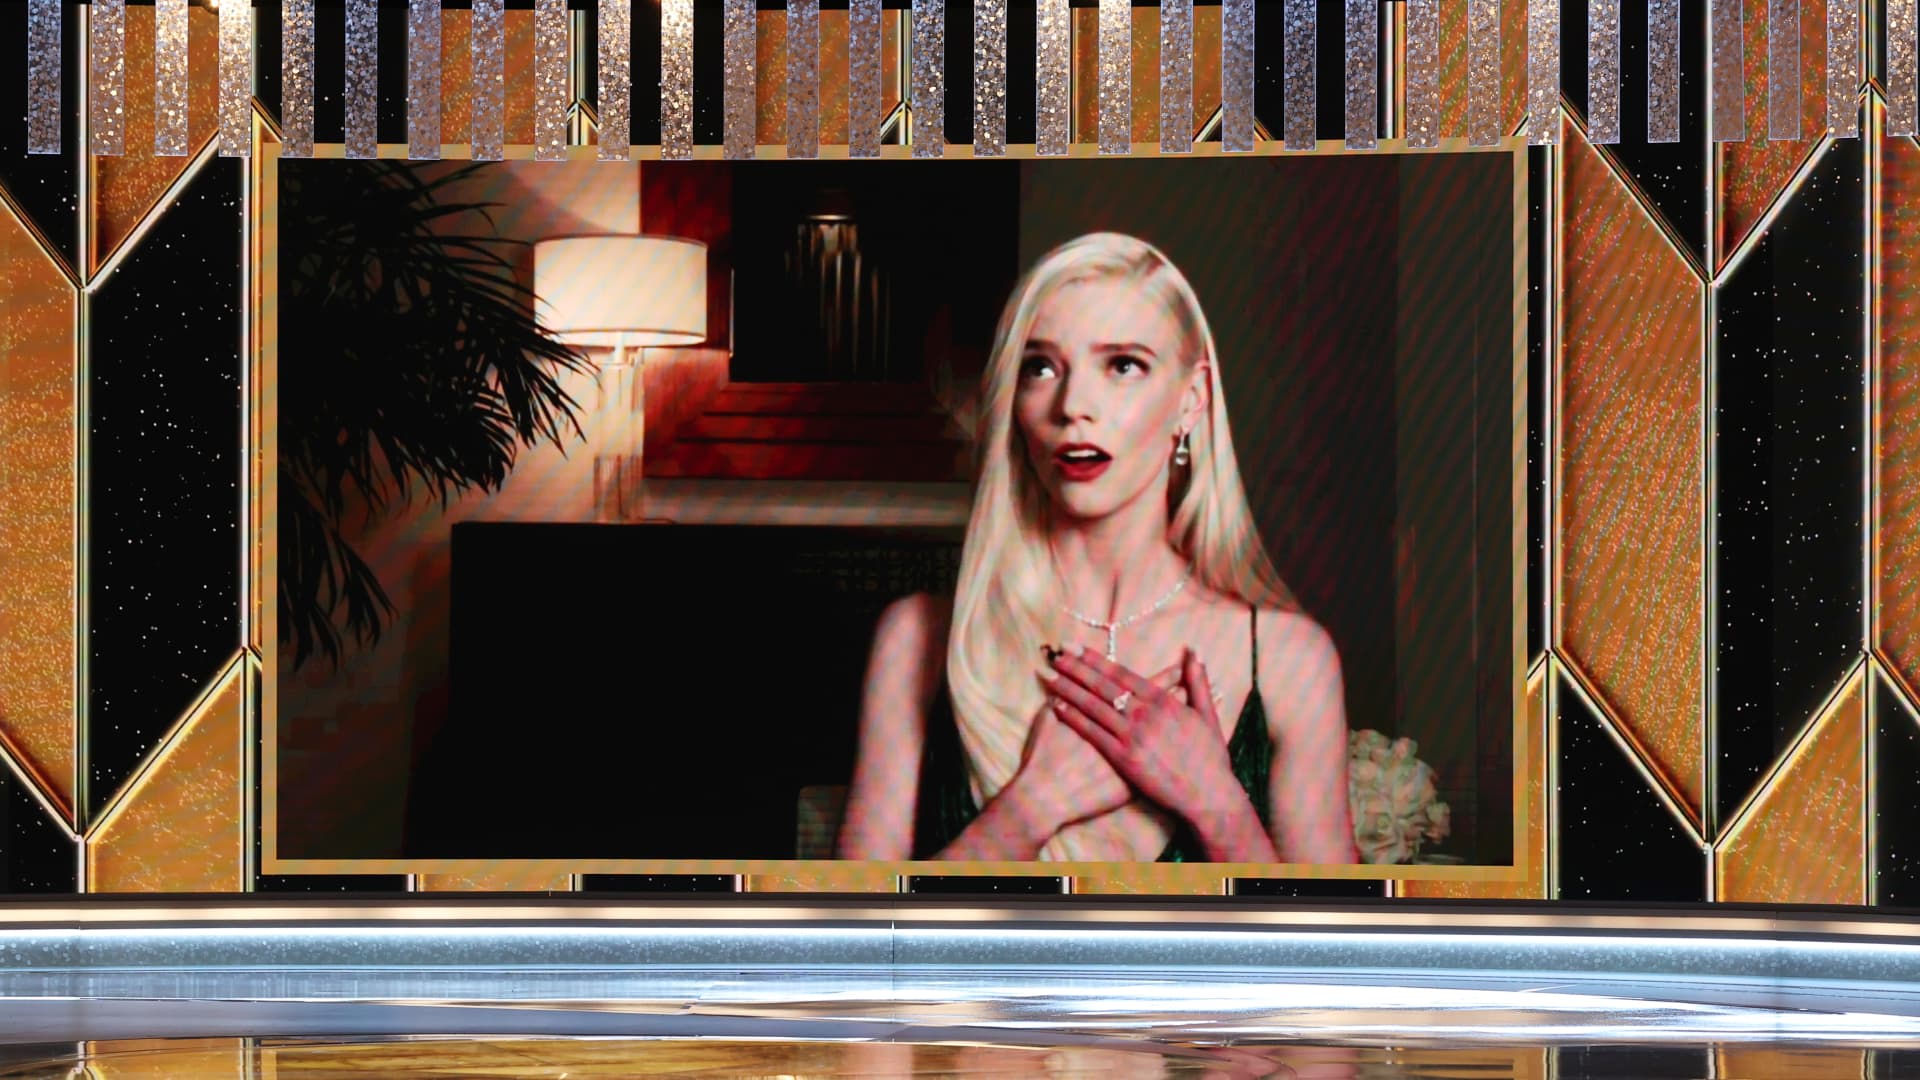 Pictured: Anya Taylor-Joy reacts via video after being announced the winner of the Best Actress - Television Motion Picture award for ‘The Queen's Gambit’ at the 78th Annual Golden Globe Awards held at The Beverly Hilton and broadcast on February 28, 2021 in Beverly Hills, California.